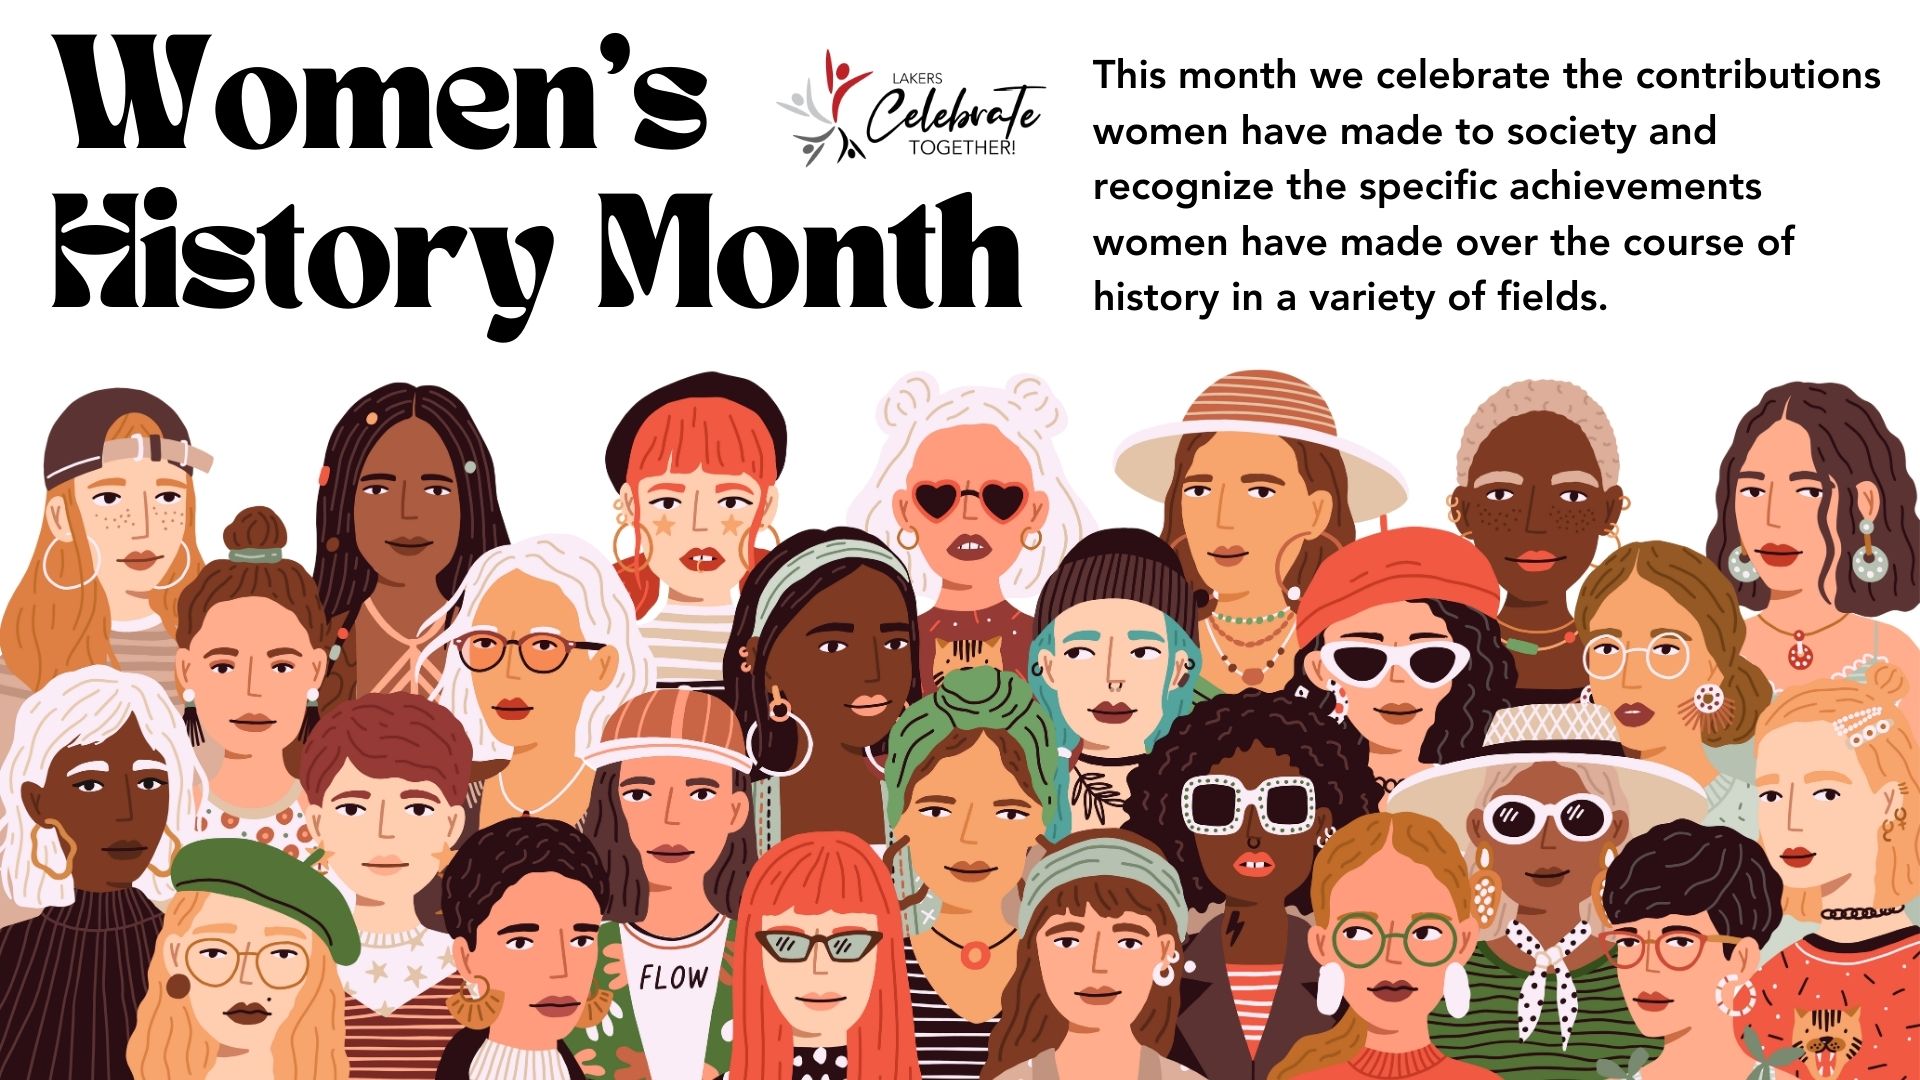 Women's History Month
Lakers Celebrate Together
This month we celebrate the contributions women have made to society and recognize the specific achievements women have made over the course of history in a variety of fields.
Large group of women of various races, ethnicities, styles and ages.